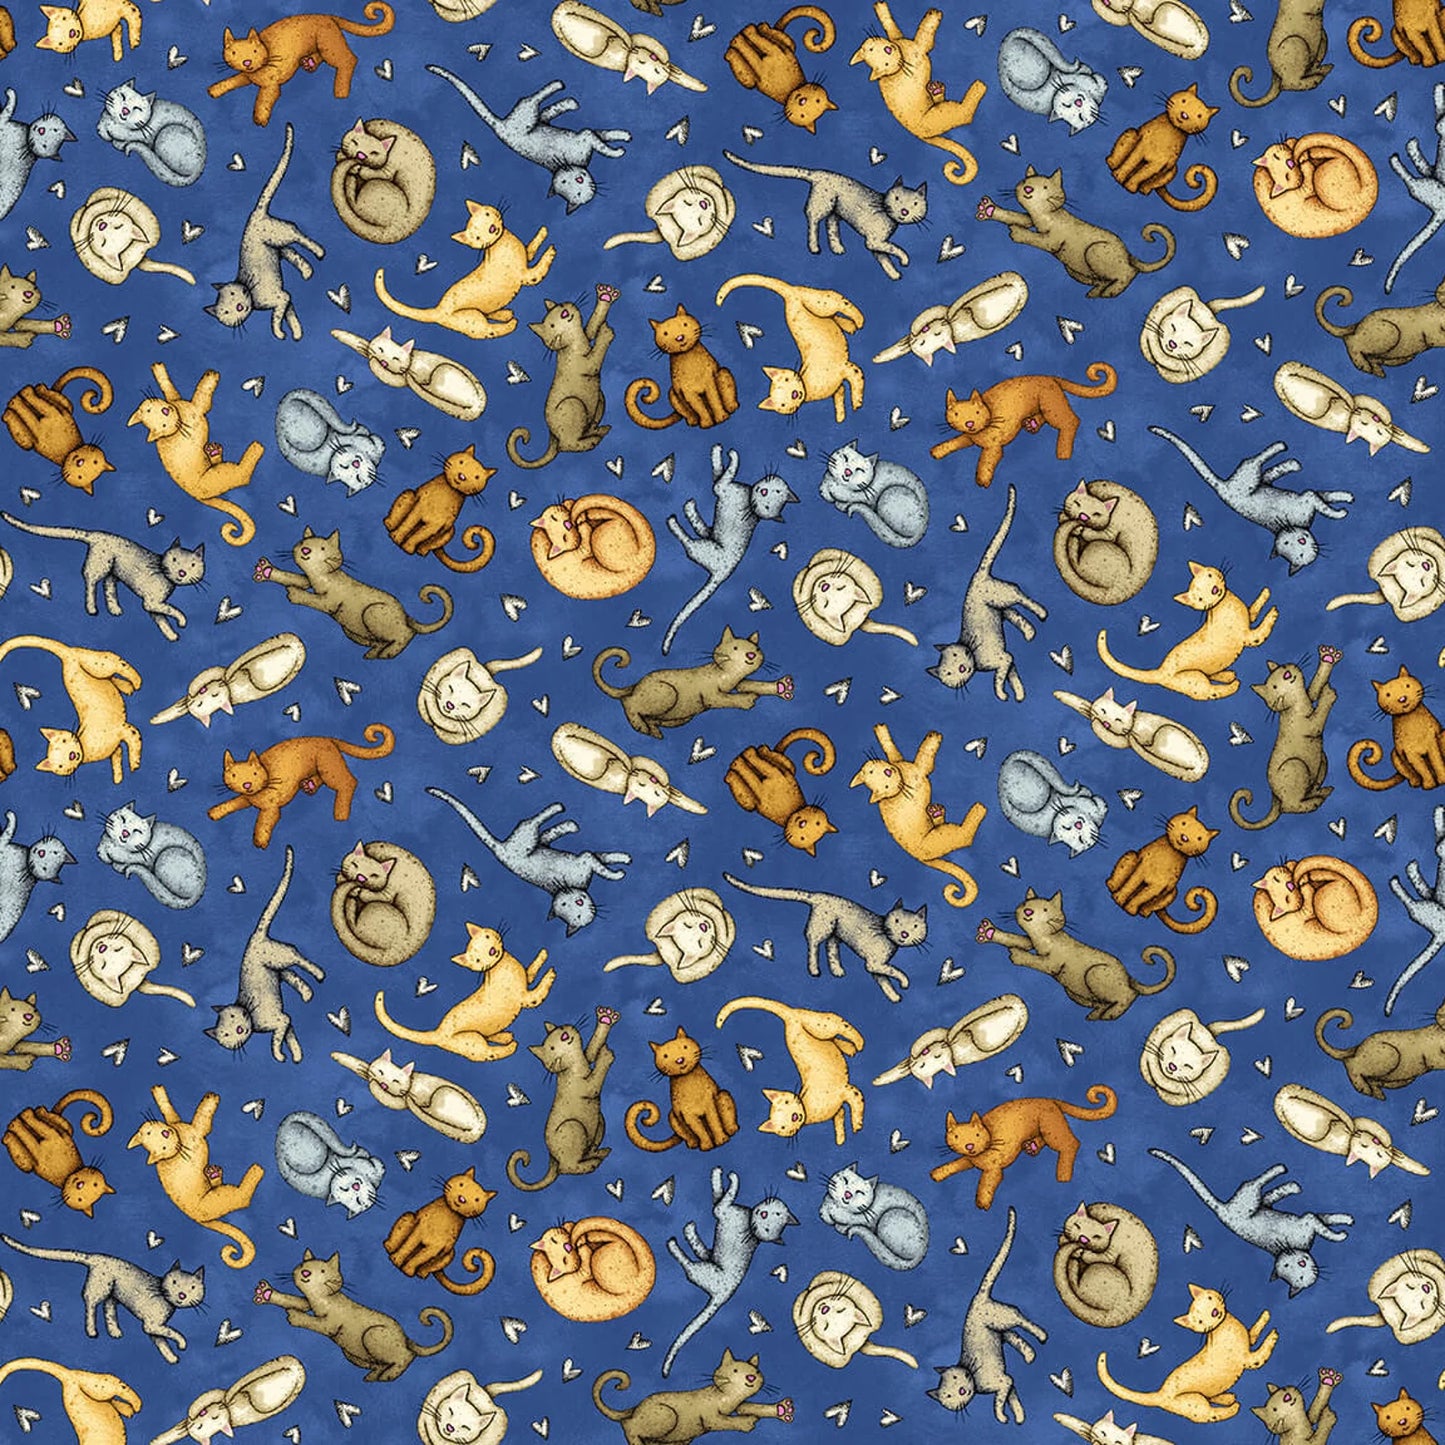 Henry Glass Cat Fabric - All You Need is Love & a Cat - Tossed Cats - Royal Blue - Cat - Rescue Cat - 9905-77 - Cotton Fabric